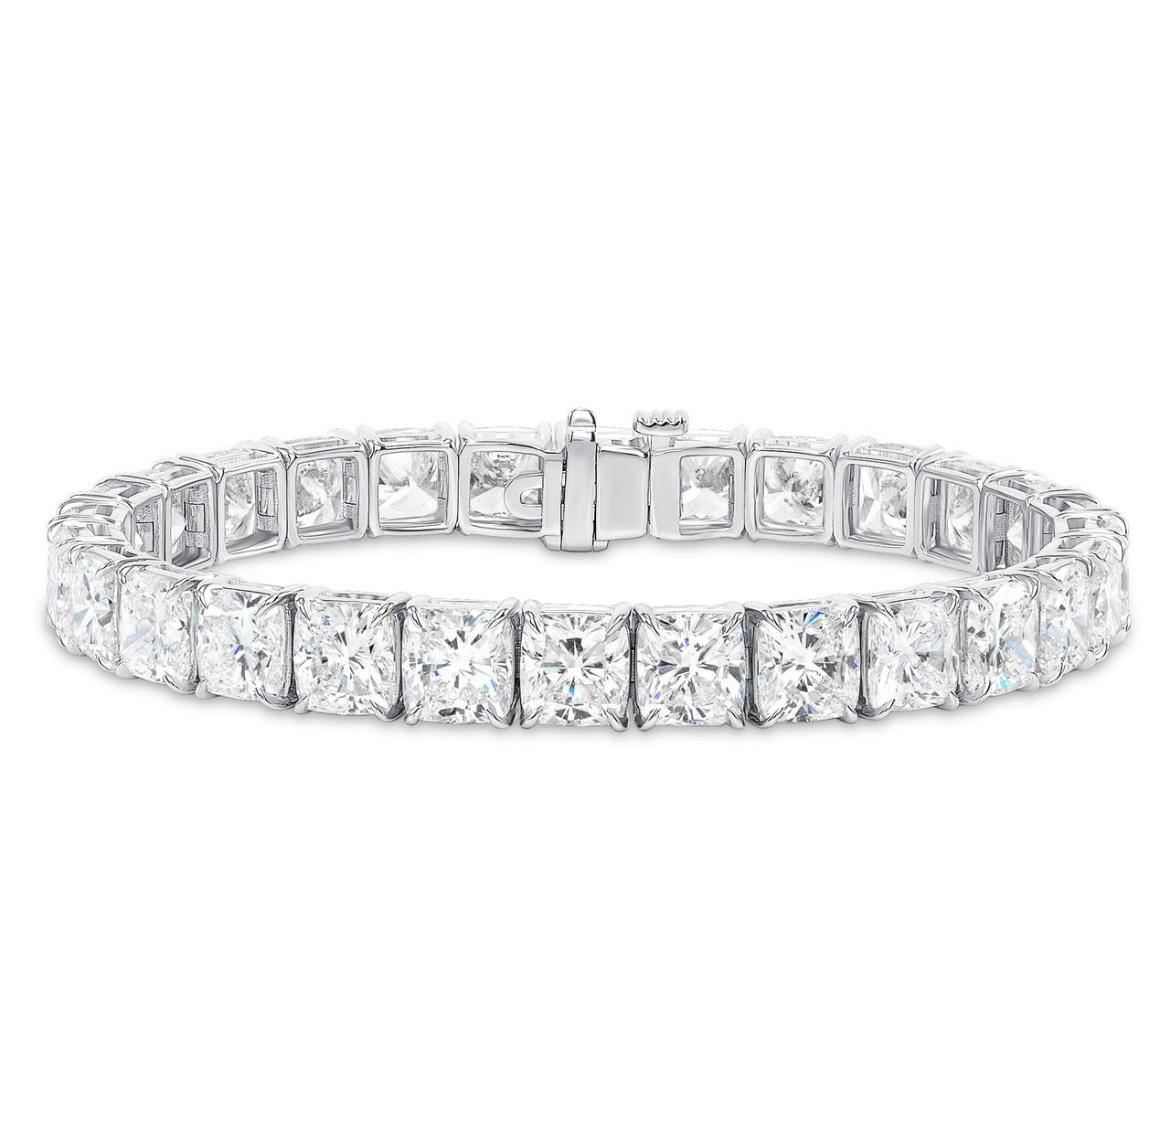 A magnificent tennis bracelet featuring 32 Cushion Cut Diamonds, each weighing 0.90-0.94 Carats for a total weight of 28.91 Carats. 
Each stone is certified by GIA as DEF in color and VVS-VS in clarity. 

Handmade in Platinum. 
Measuring 7 inches. 